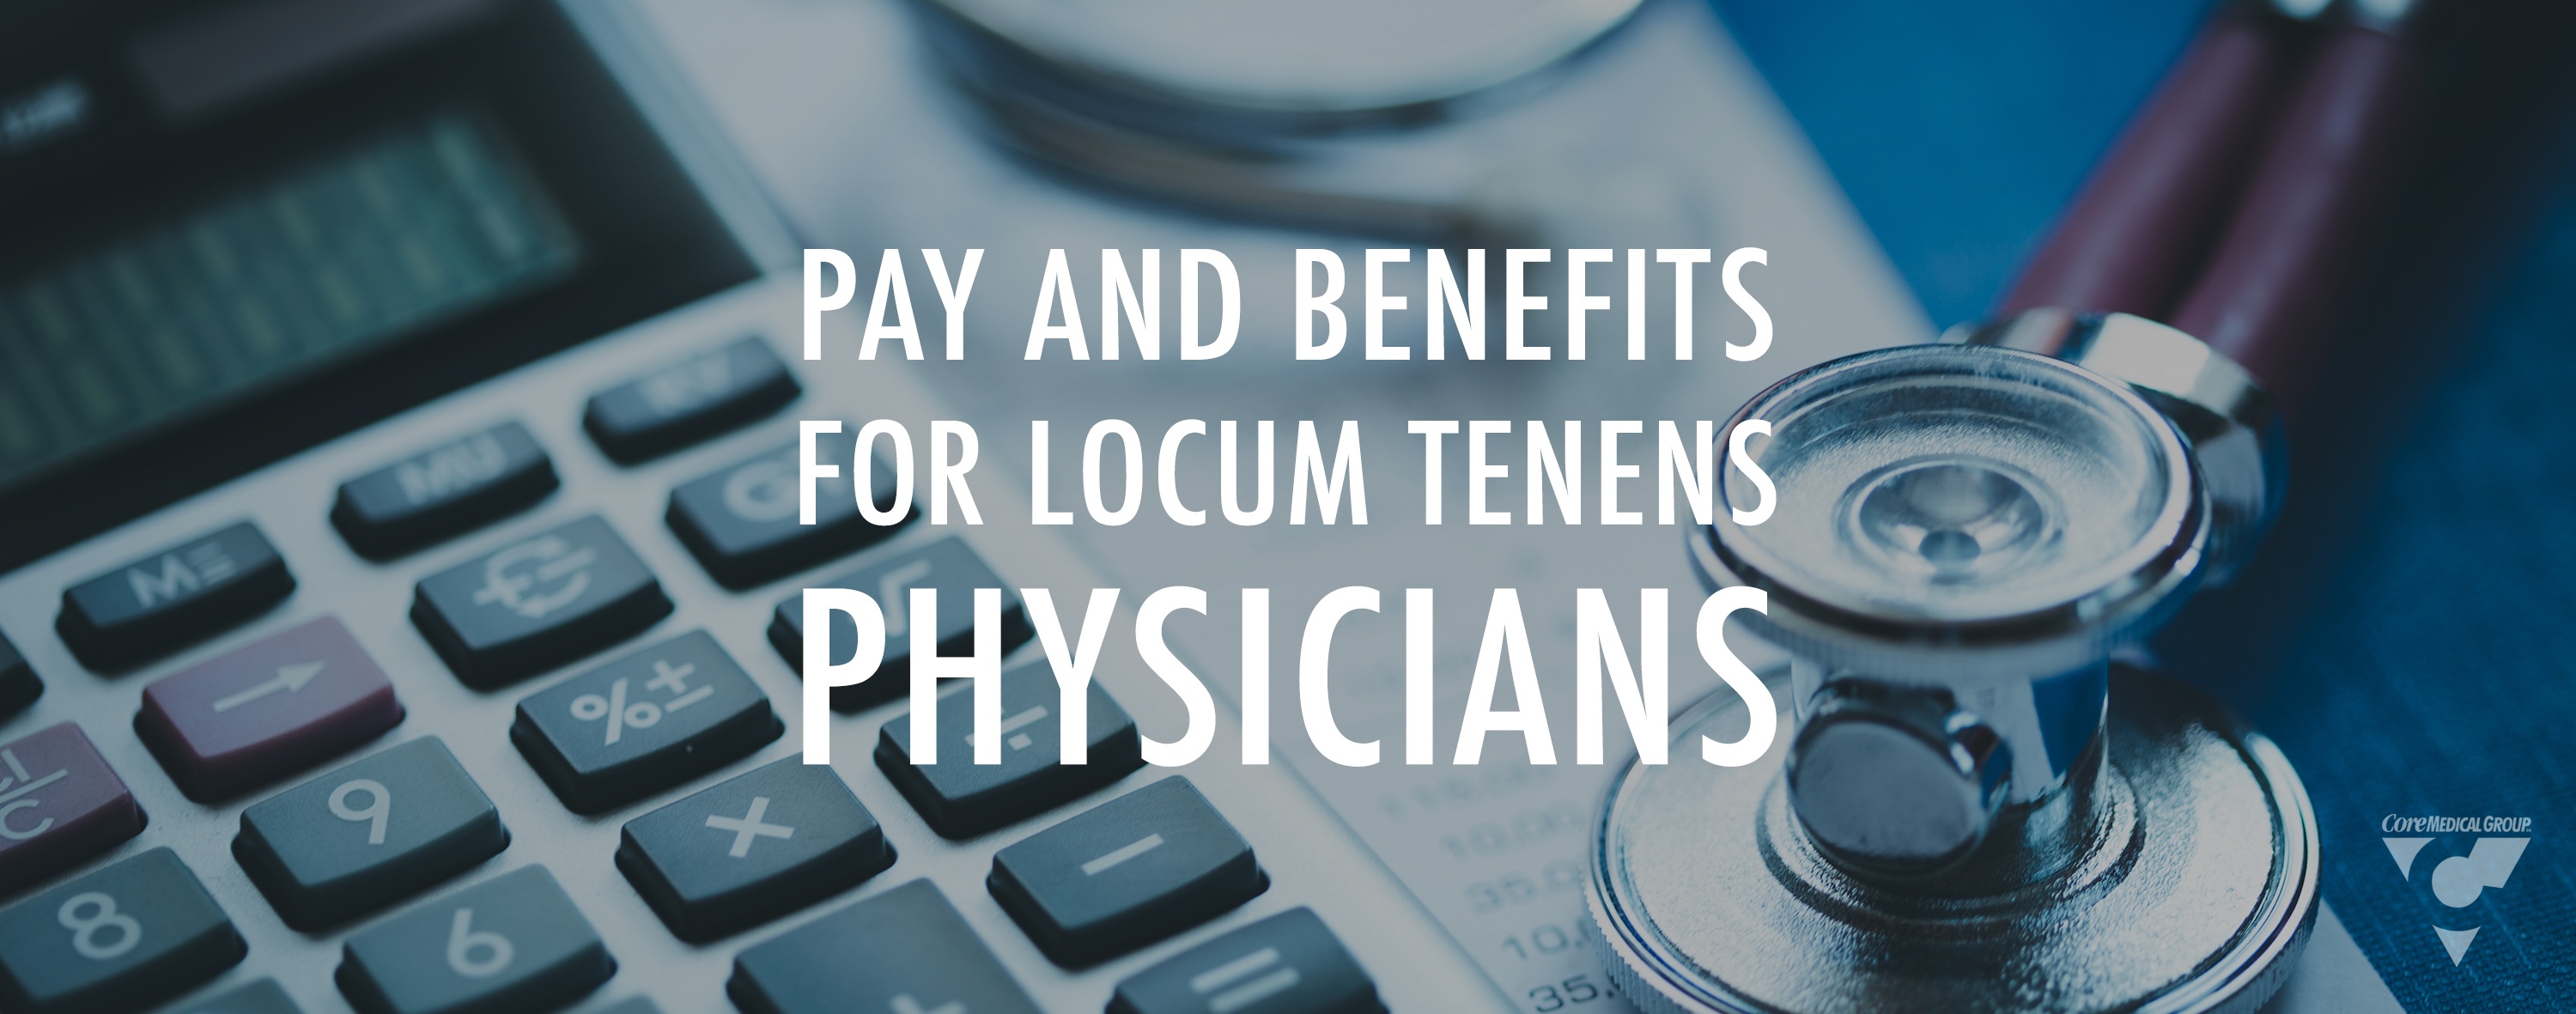 Pay_and_Benefits_for_Locum_tenens_physicians_blog_feature_image